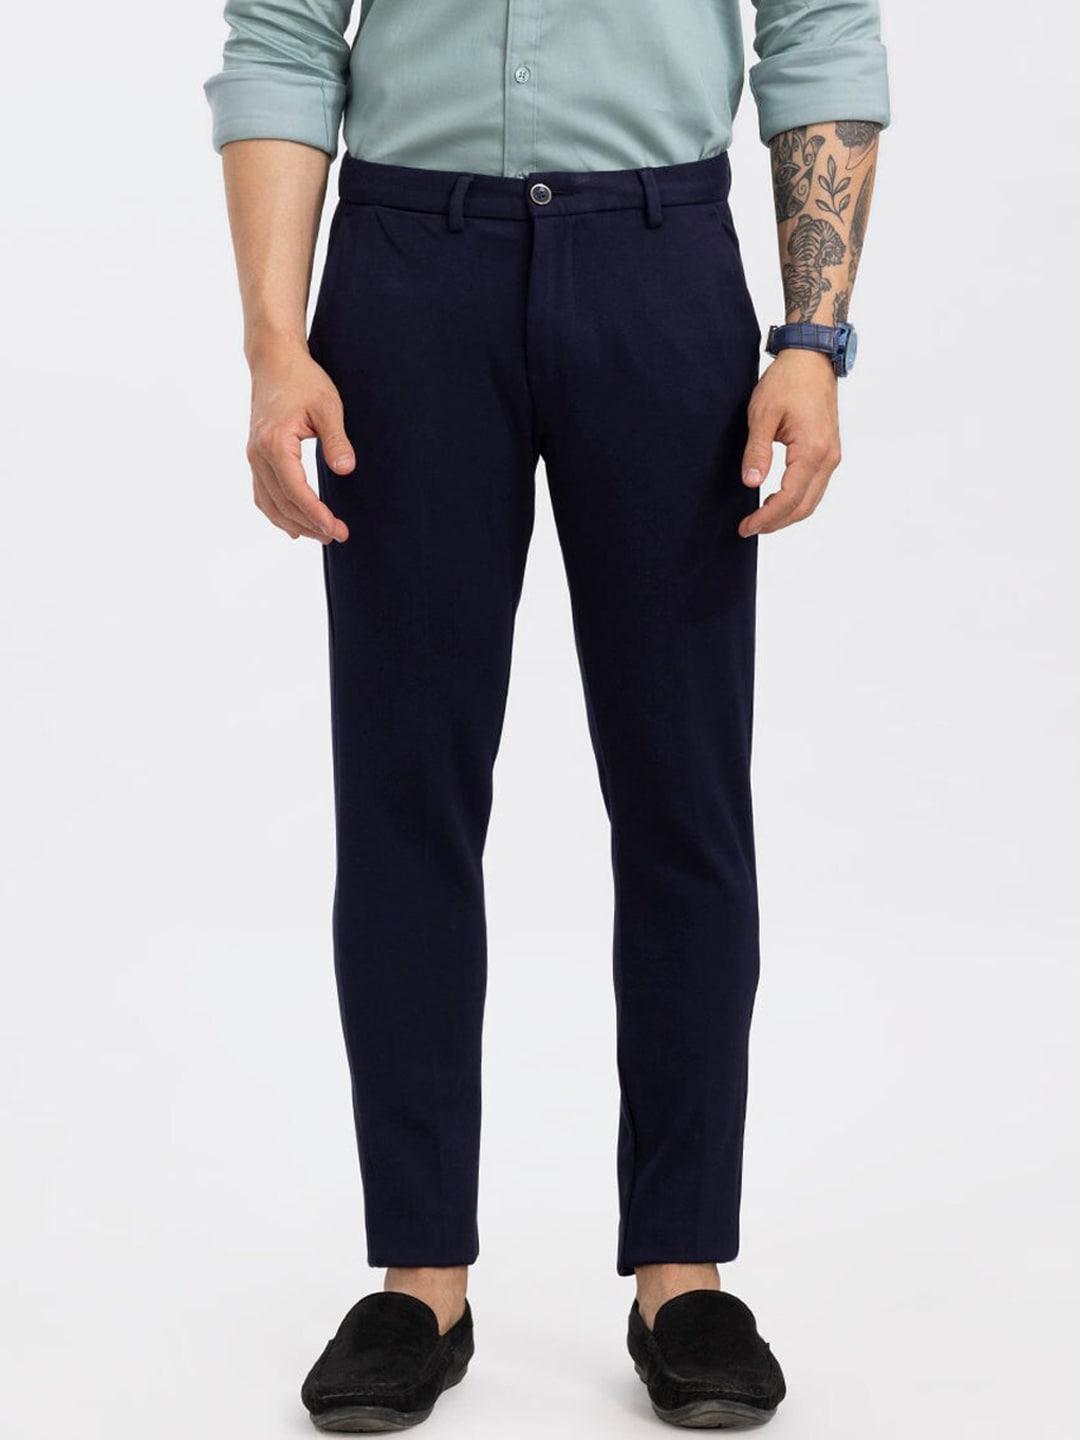 Snitch Navy Blue Smart Mid Rise Plain Cotton Chinos